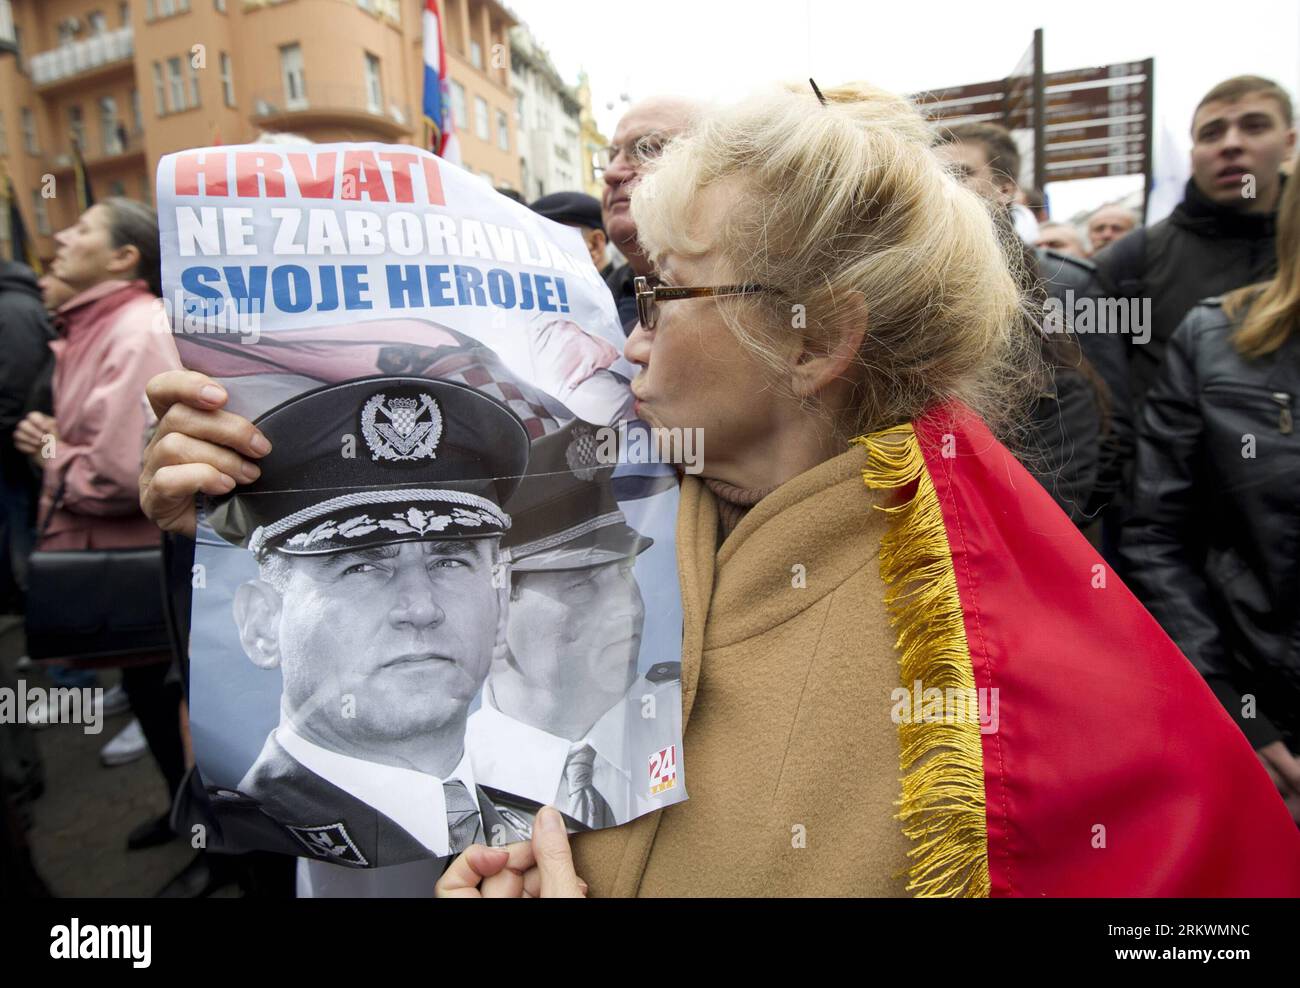 Bildnummer: 58710689  Datum: 16.11.2012  Copyright: imago/Xinhua (121116) -- ZAGREB, Nov. 16, 2012 (Xinhua) -- A senior woman kisses a photo of two Croatian military officers in Zagreb, capital of Croatia, on Nov. 16, 2012. An UN court on Friday overturned convictions of two senior Croatian military officers charged with war crimes during the Balkan conflict in the 1990s. The appeals chamber of the International Criminal Tribunal for the former Yugoslavia (ICTY) acquitted Ante Gotovina and Mladen Markac, and ordered the pair s immediate release. (Xinhua/Miso Lisanin) (lr) CROATIA-ZAGREB-TWO SE Stock Photo